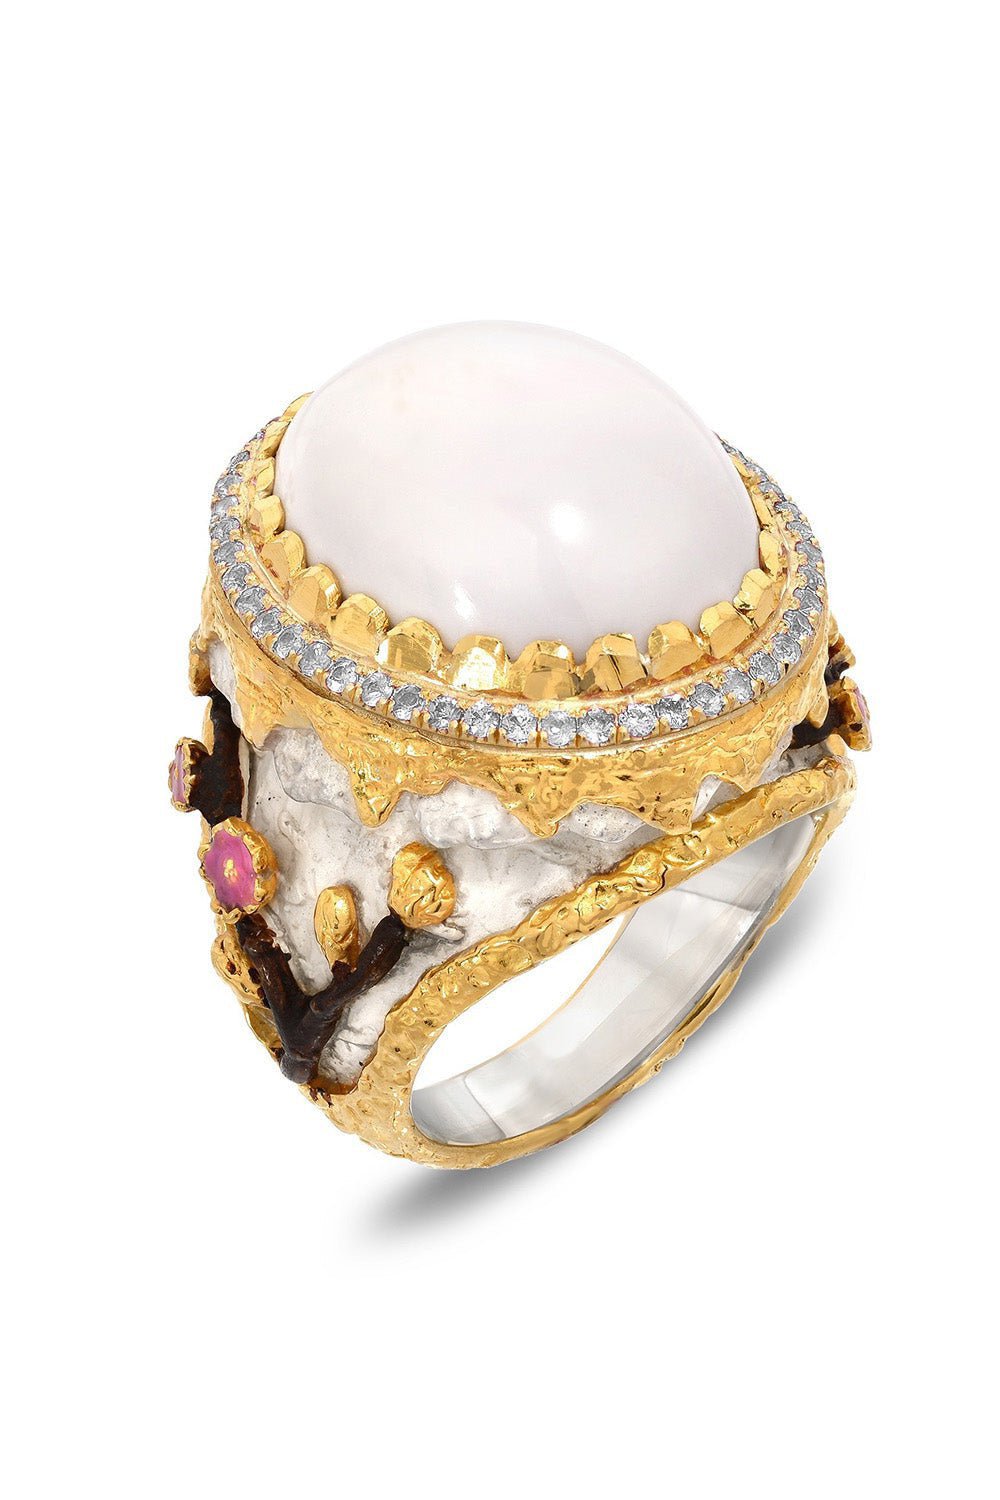 VICTOR VELYAN-Cacholong Opal Diamond Floral Ring-YELLOW GOLD